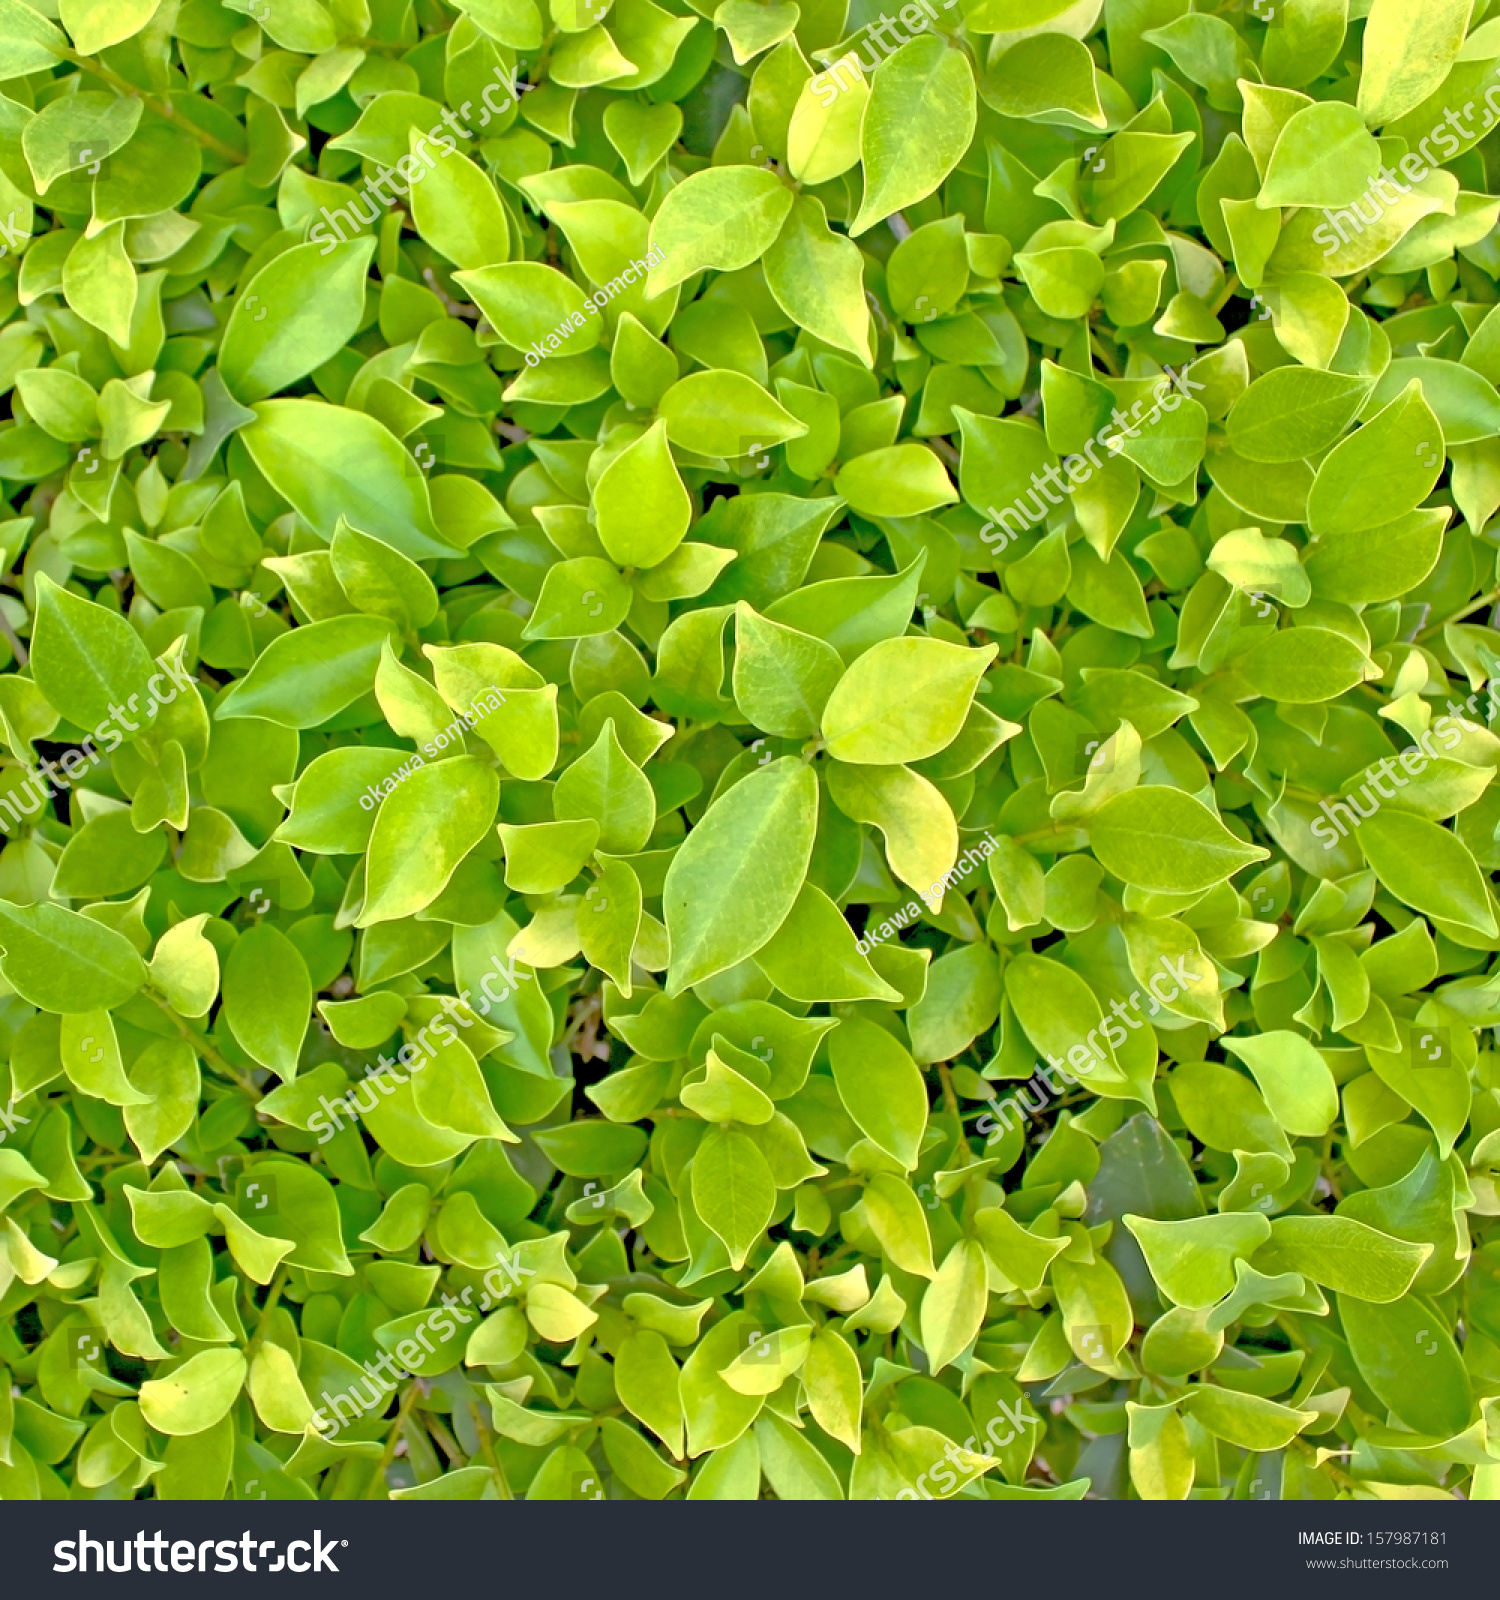 Green Leaf Background Seamless Tileable Texture Stock Photo (Edit ...